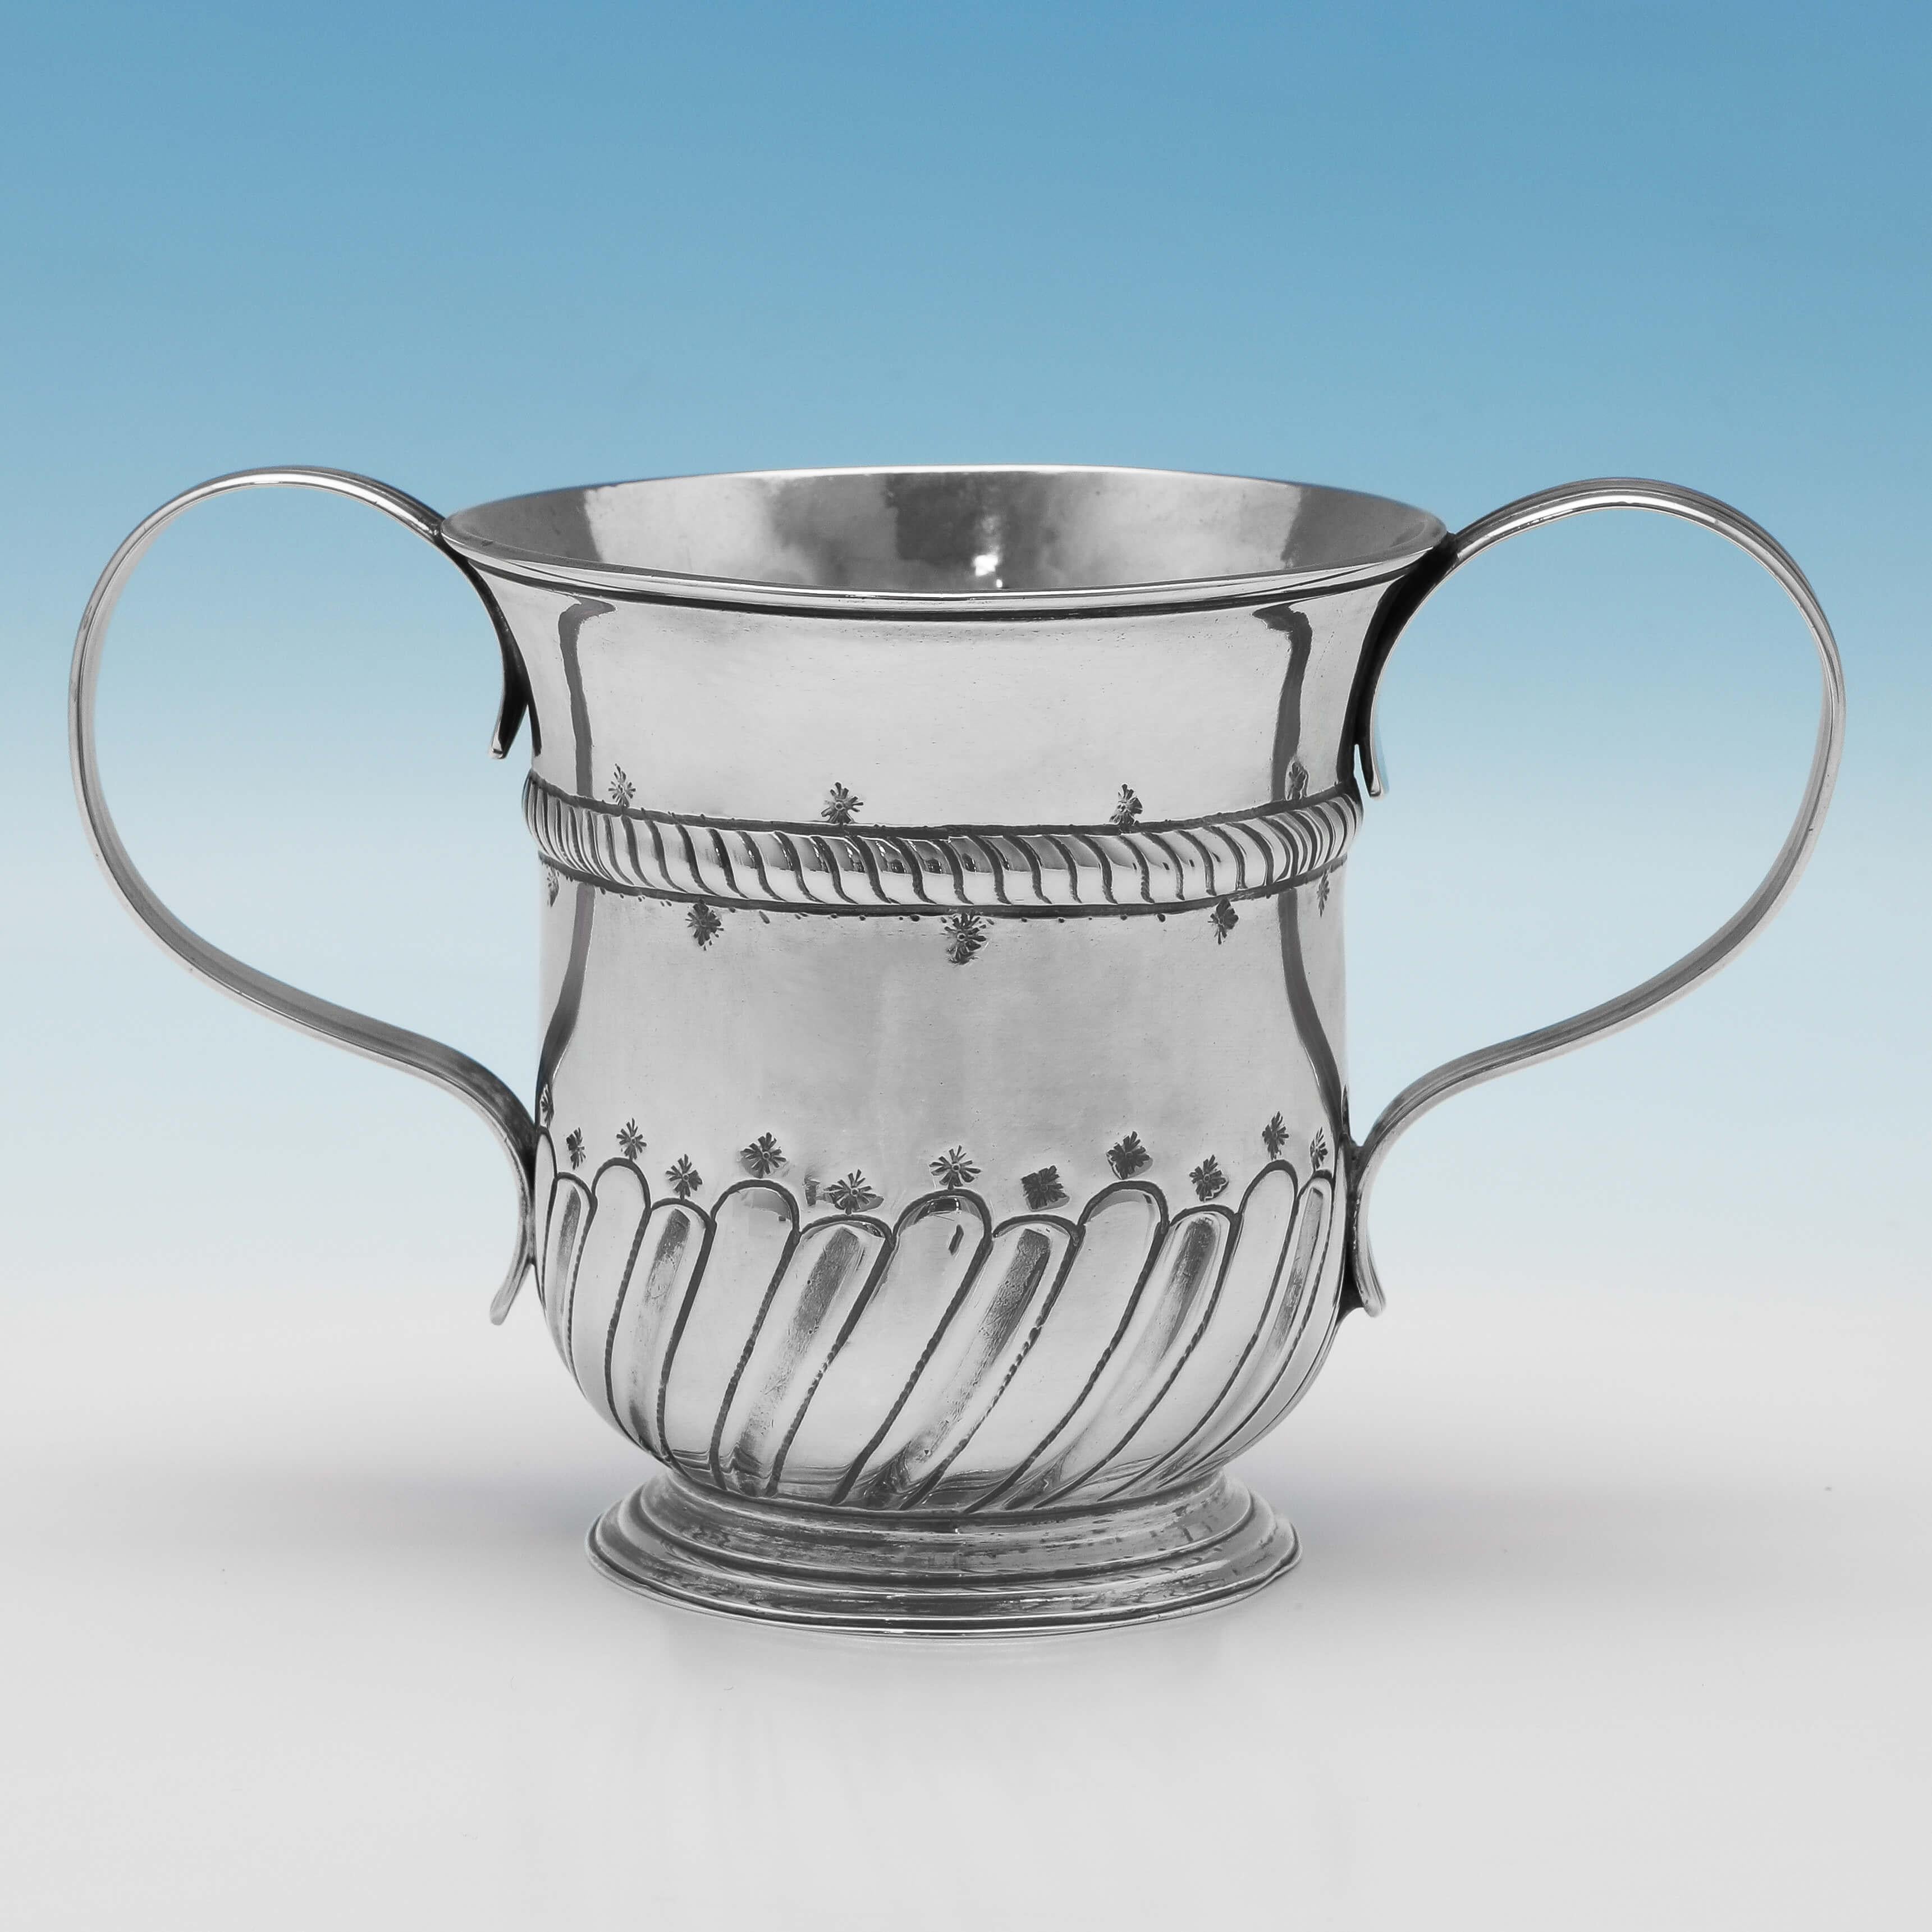 Hallmarked in London in 1756 by William Shaw II & William Preist, this George II, antique sterling silver porringer, is of a traditional form, featuring reed detailed handles and chased decoration to the body. The porringer measures 4